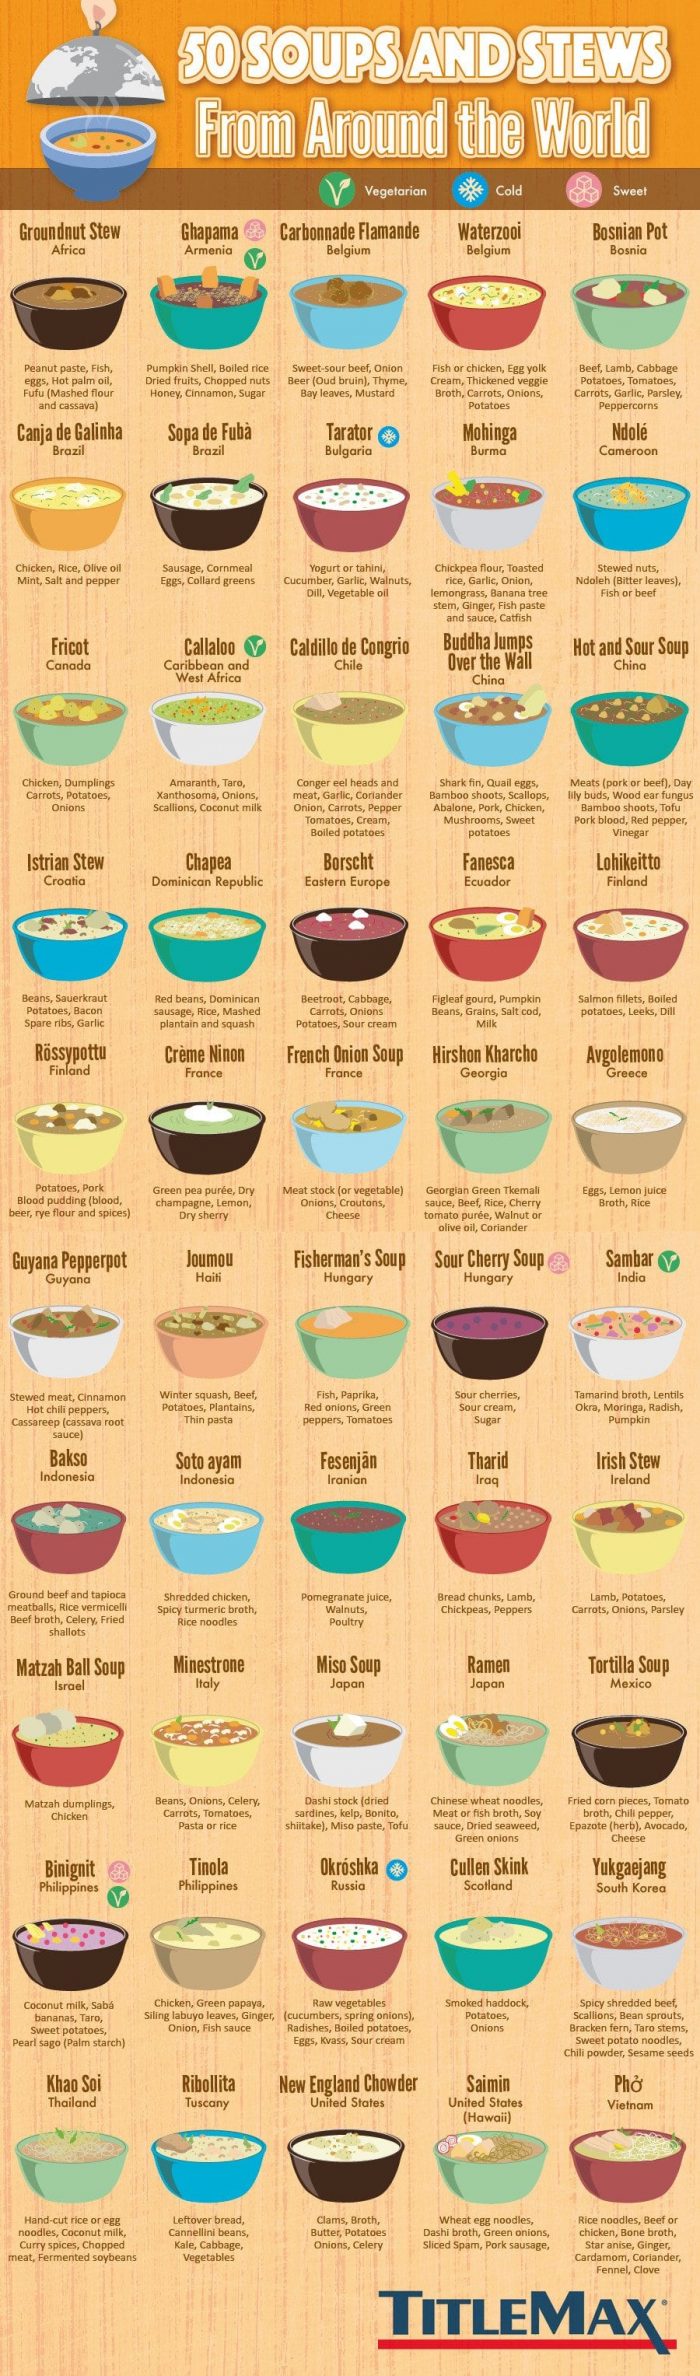 50 Soups And Stews From Around The World #Best infographic #infographic s